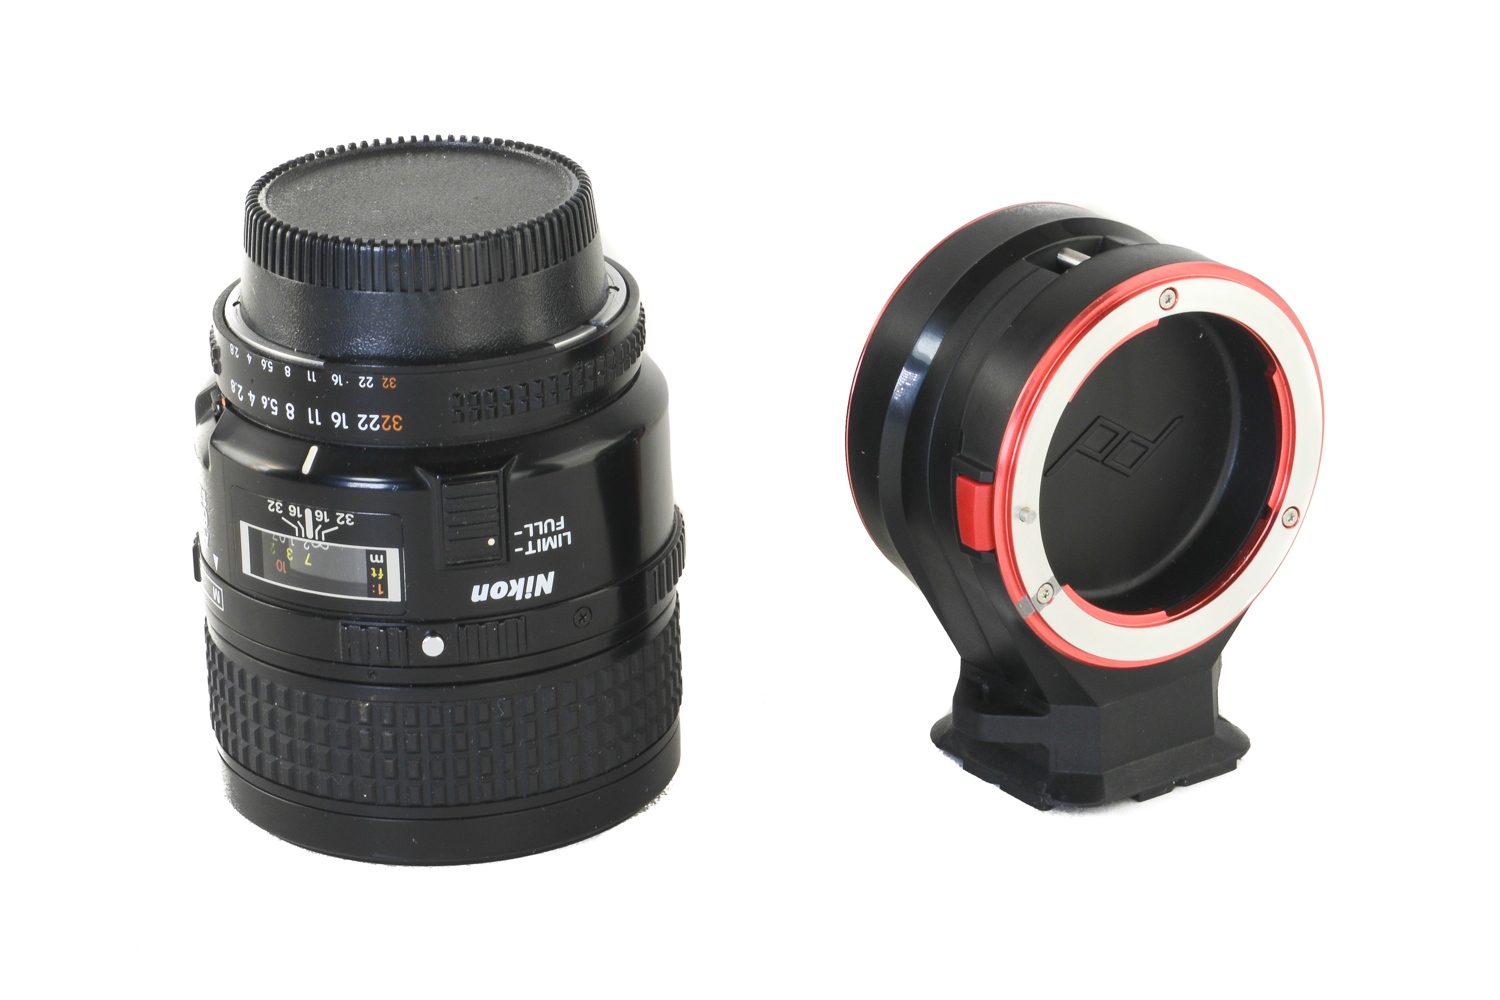 swapping lenses no longer a hassle with peak designs new accessory design capturelens 4